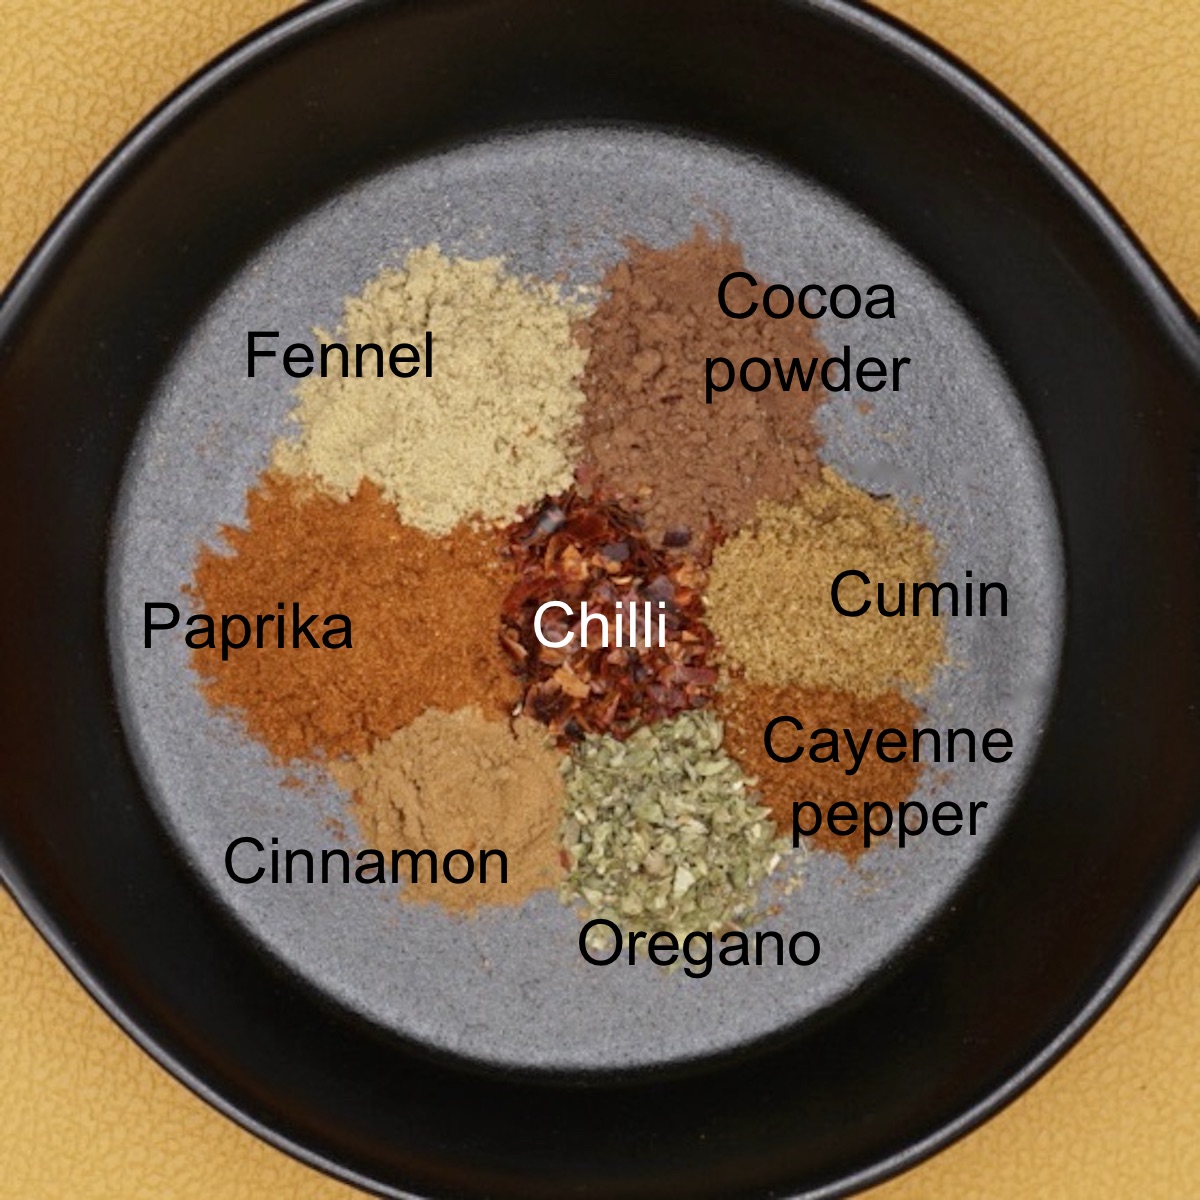 Labelled ingredients for chilli seasoning.